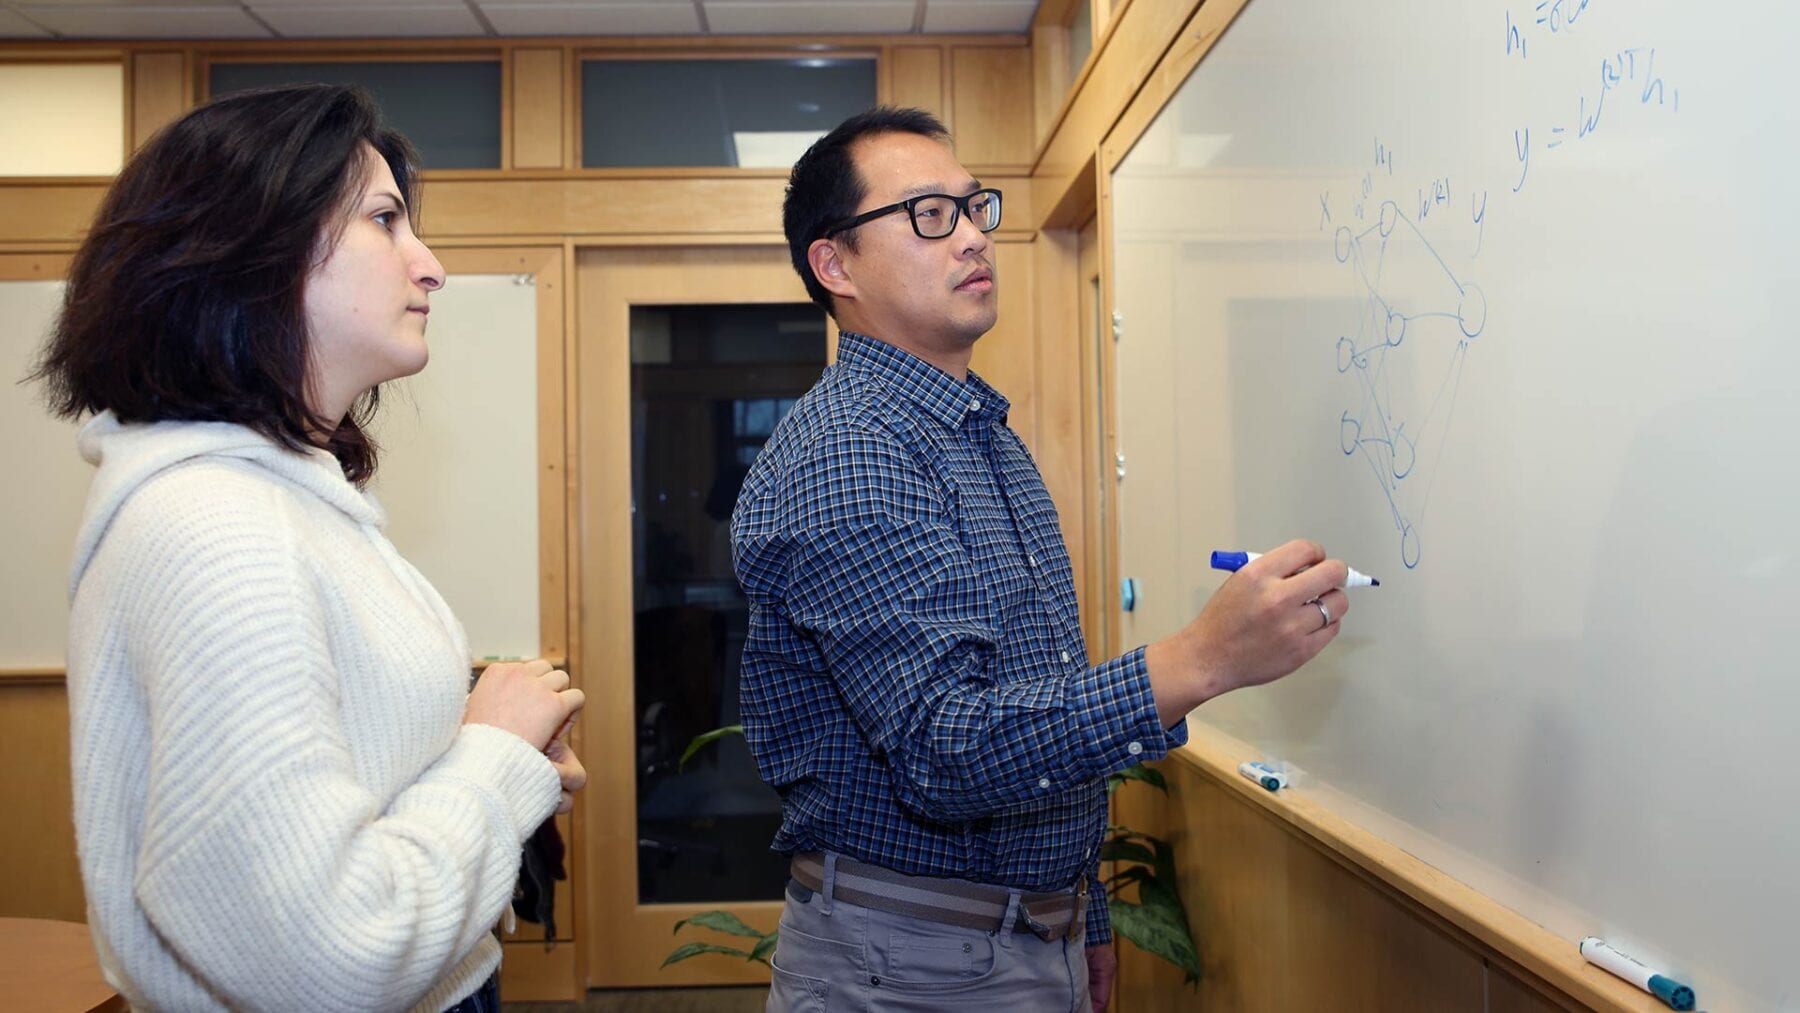 Cold Spring Harbor Laboratory Assistant Professor Peter Koo in his lab with graduate student Shushan Toneyan. Koo’s team studies how machine learning AI called deep neural networks (DNNs) work. He developed a new method for investigating how these DNNs learn and predict the importance of certain patterns in RNA sequences.